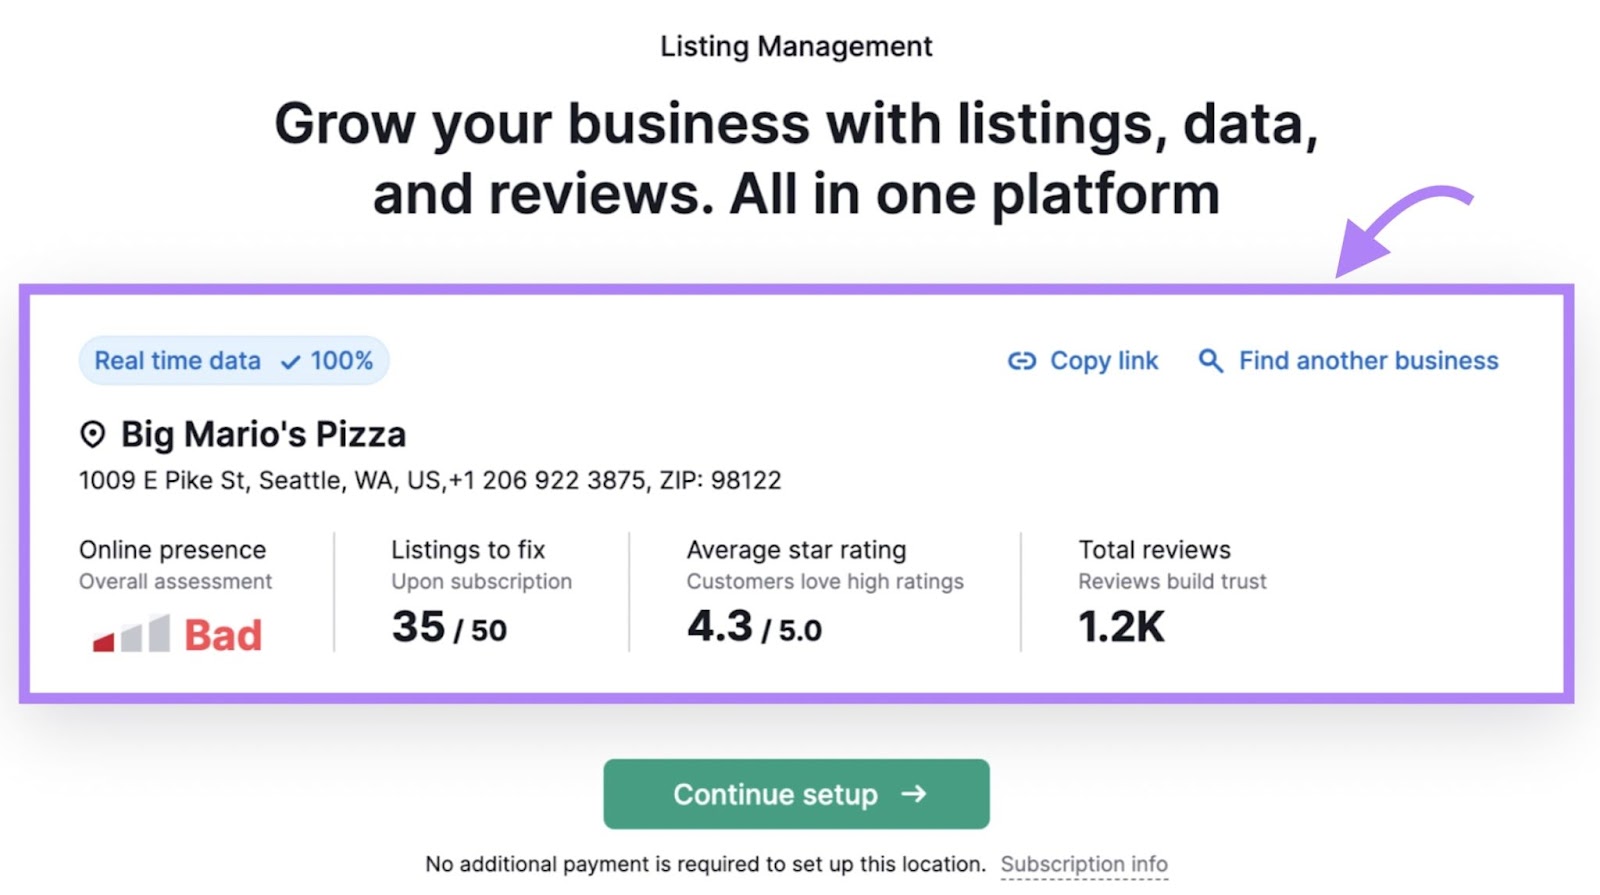 a summary of business's online presence, total reviews, and business listings shown in Listing Management tool